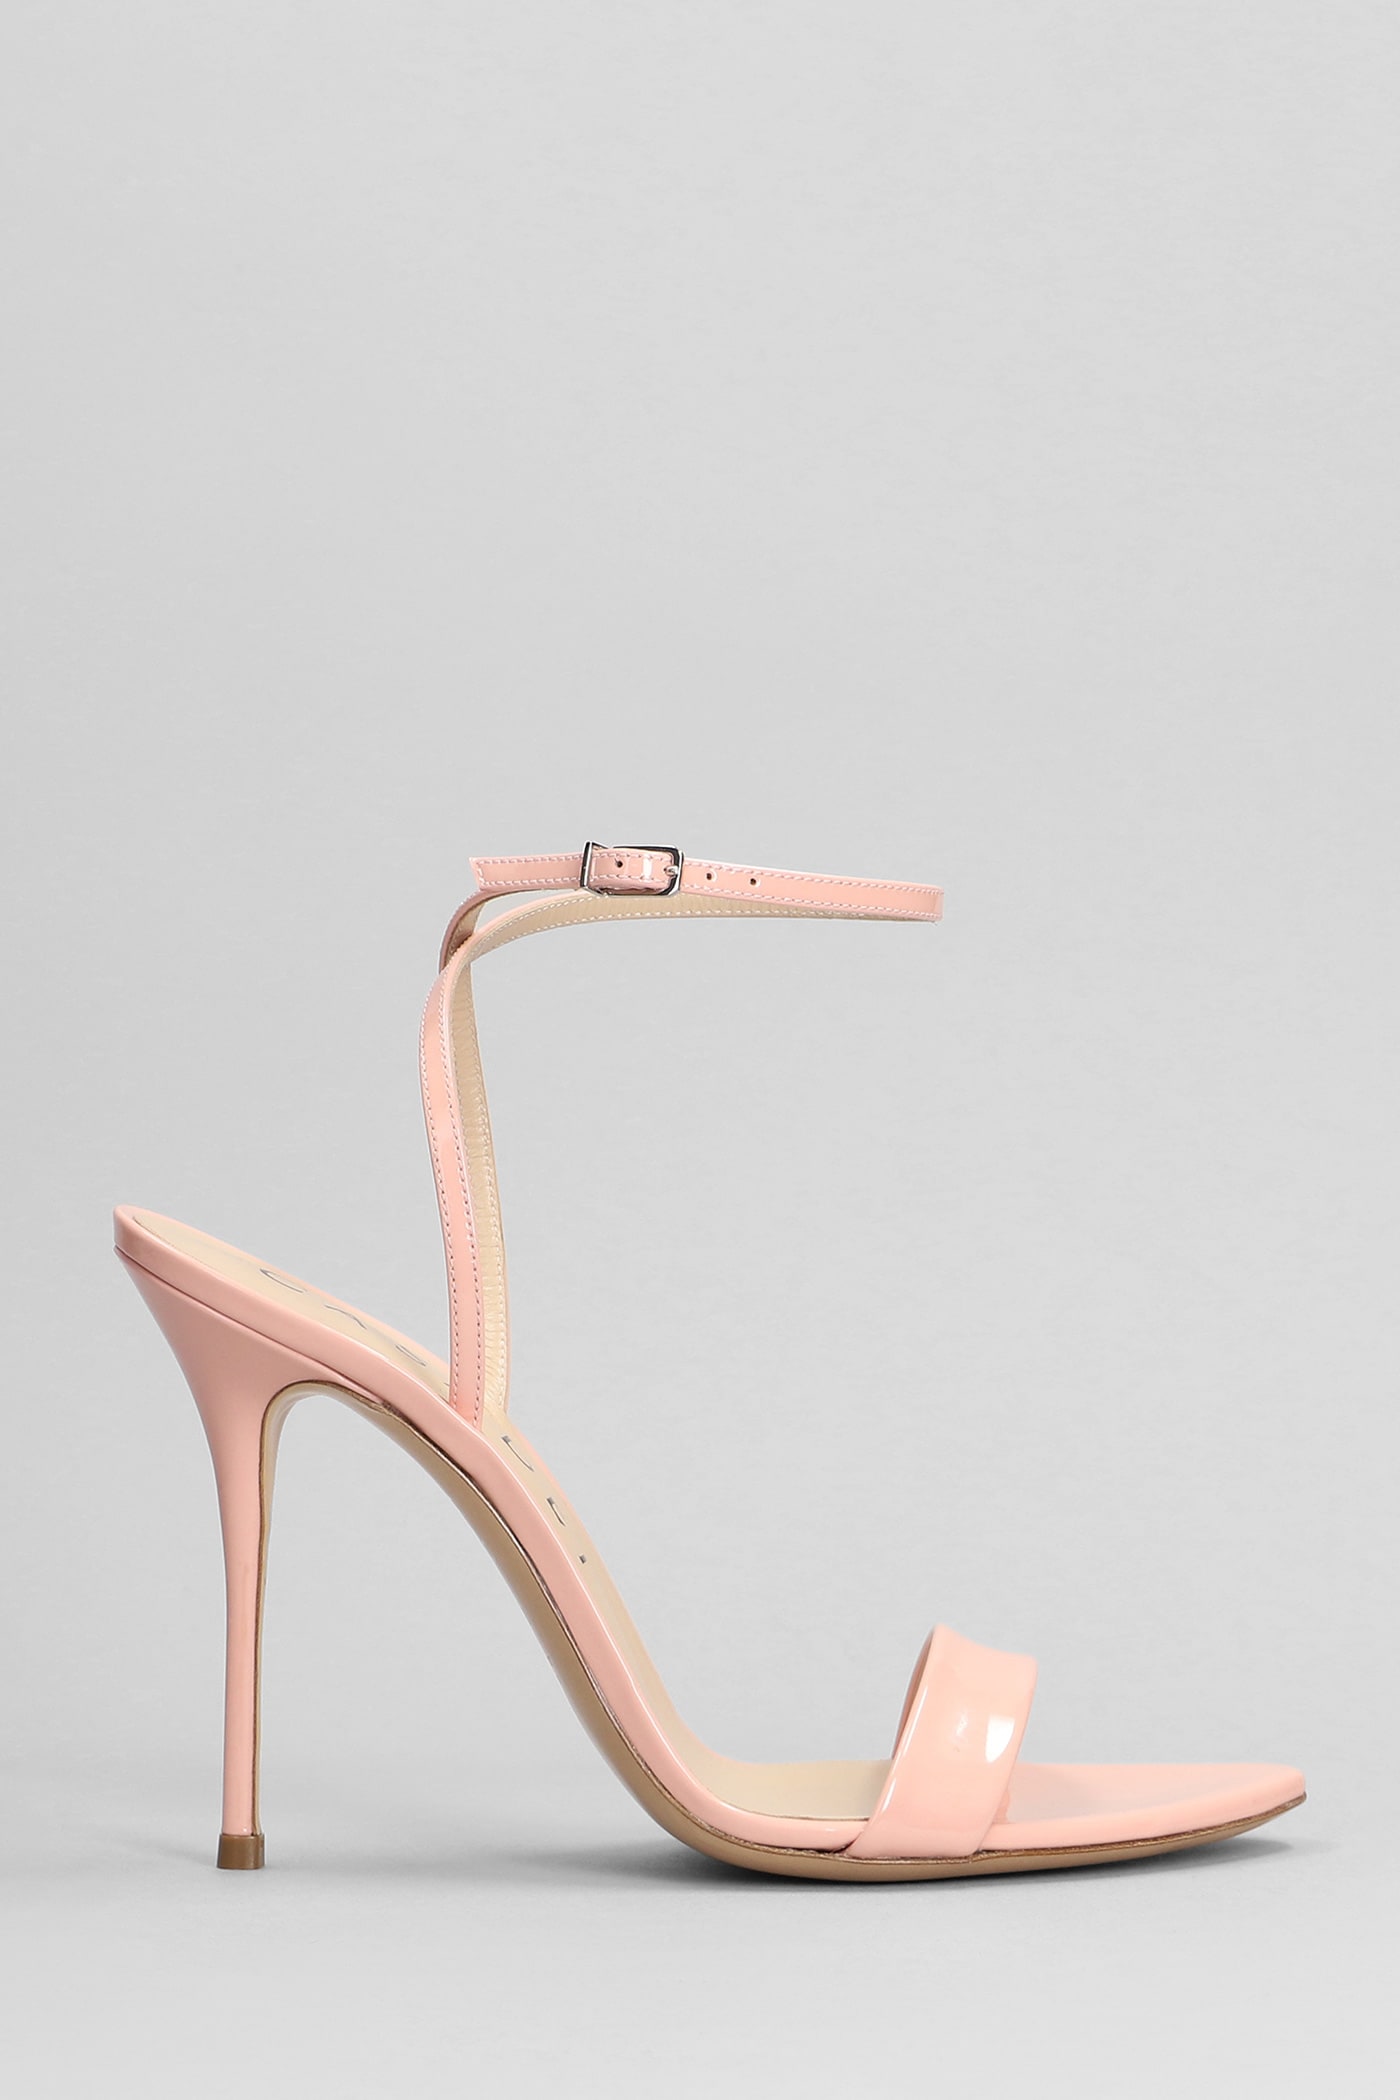 Scarlet Sandals In Rose-pink Patent Leather